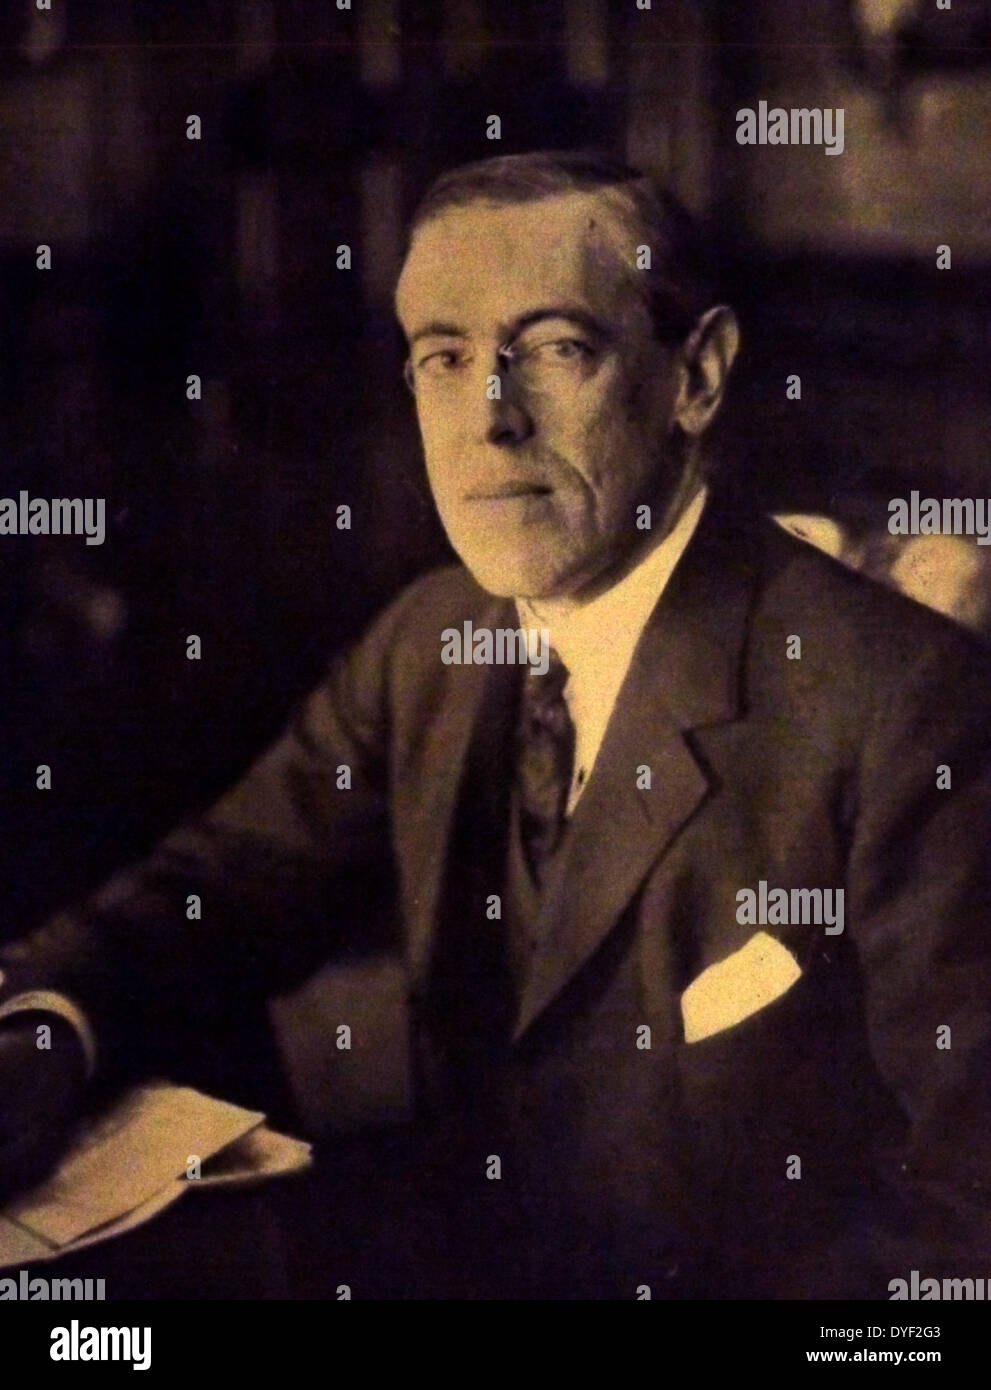 Thomas Woodrow Wilson photo dated 1917. 28th President of the United States, in office from 1913 to 1921. Born 1856 died 1924 Stock Photo